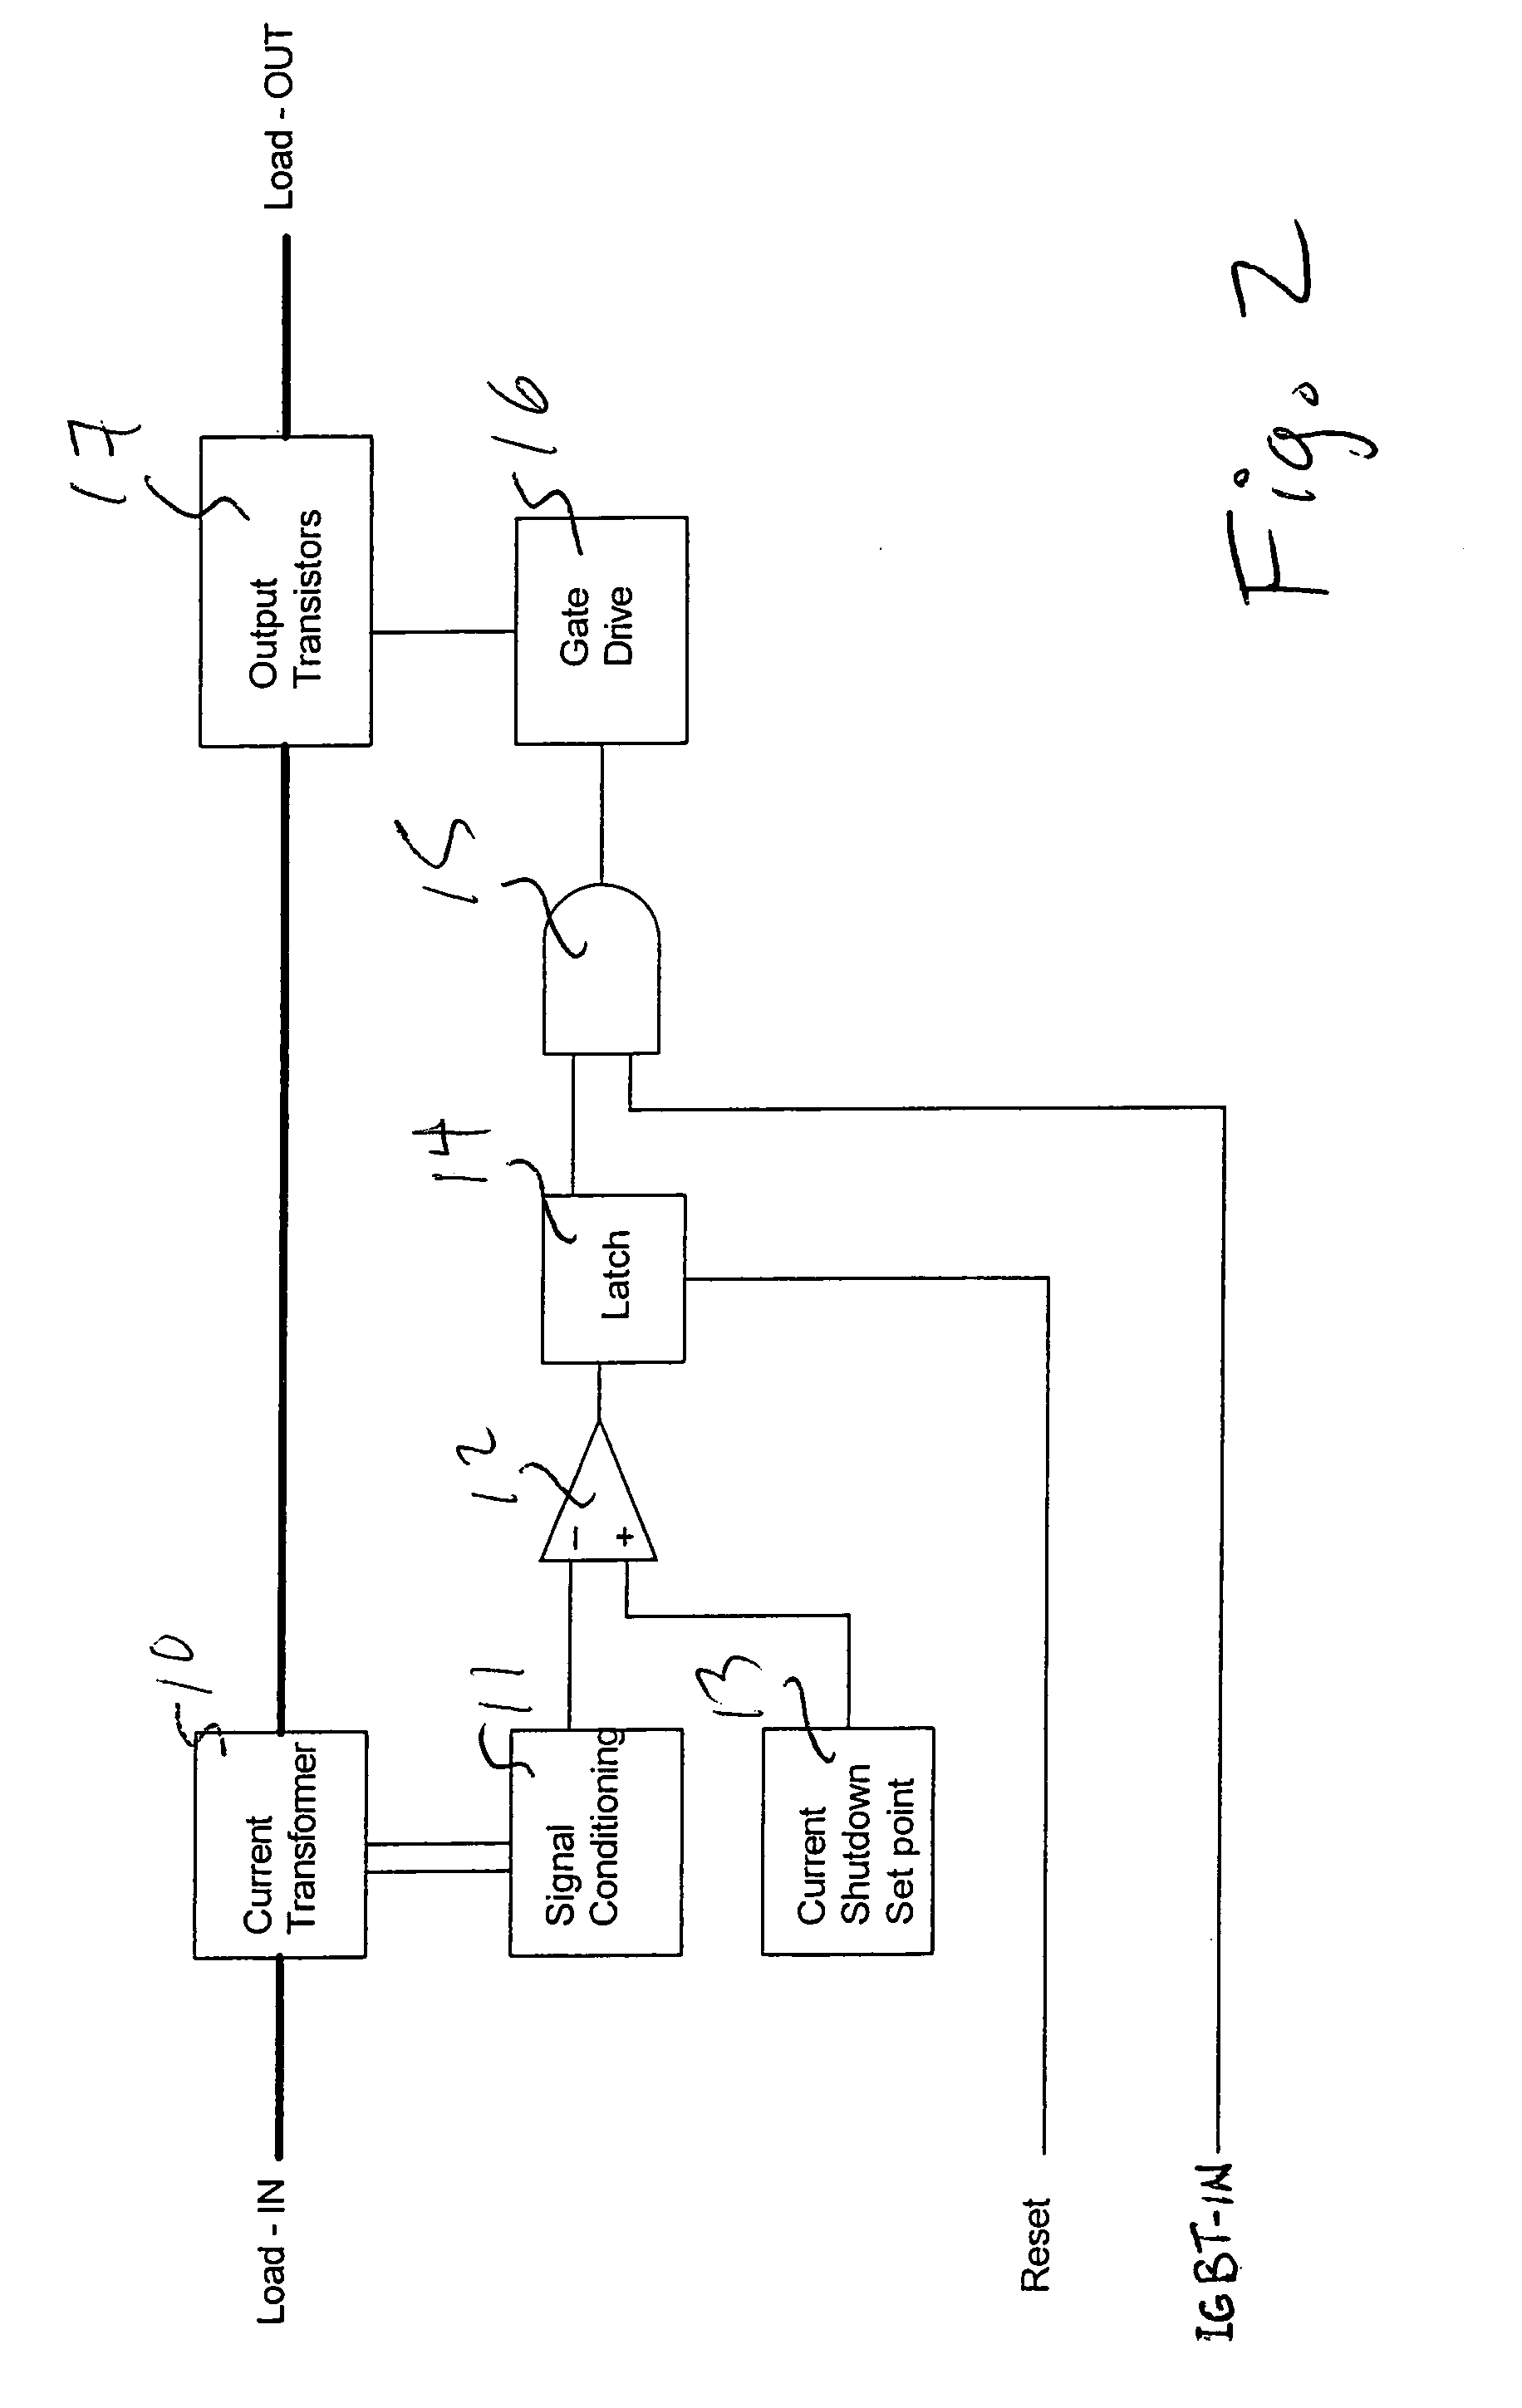 Safety tester having a high-voltage switching relay protected by an in-line electronic circuit breaker